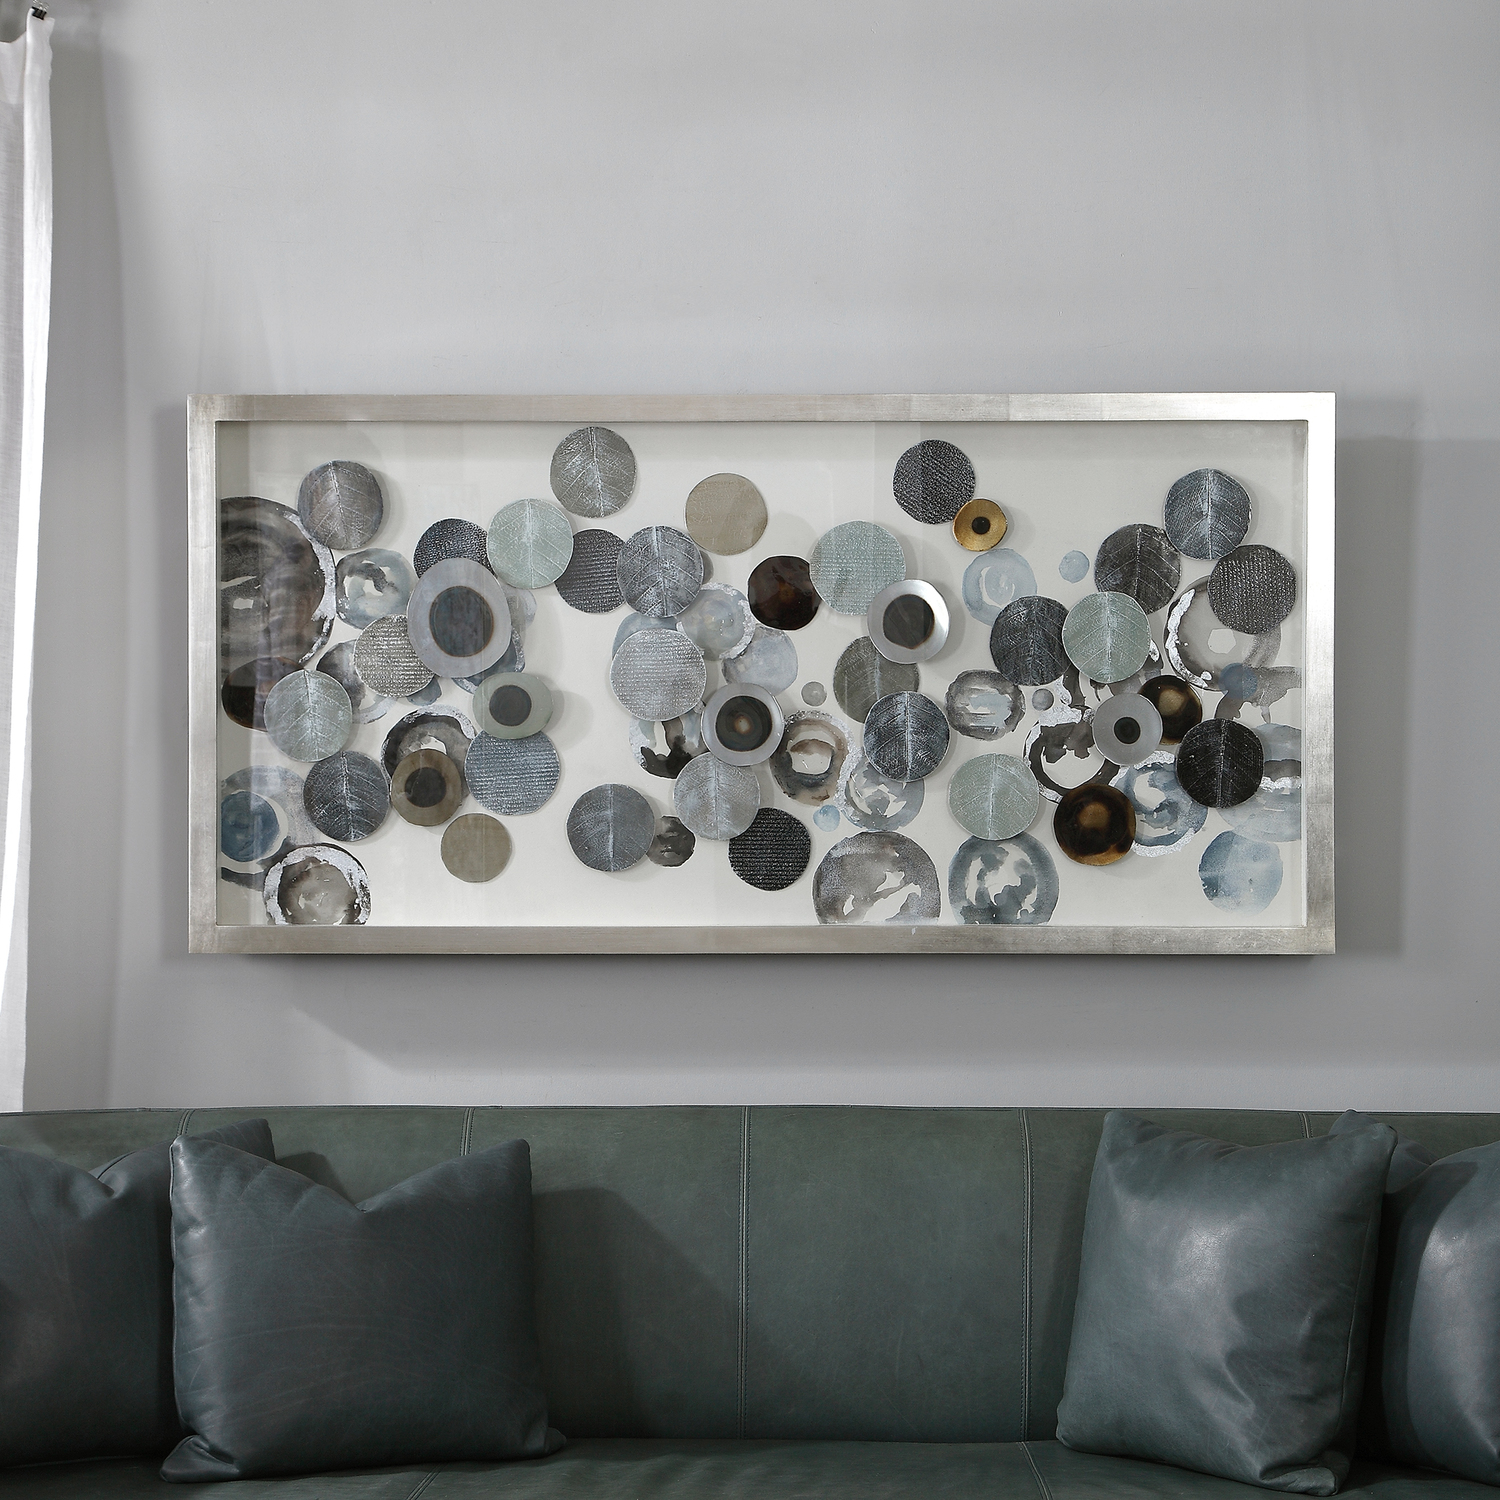  Uttermost Shadow Box Boxes and Bookends Abstract In Design, This Art Features Overlapping, Blow Torched Iron Discs With Hand Painted Acrylic Accents In Tones Of Silver, Brown, Blue, And Green. The Art Is Under Glass And Is Encased By A Lightly Antiqued Silver Leaf Shadow Box. May Be Hung Horizontal Or Vertical.